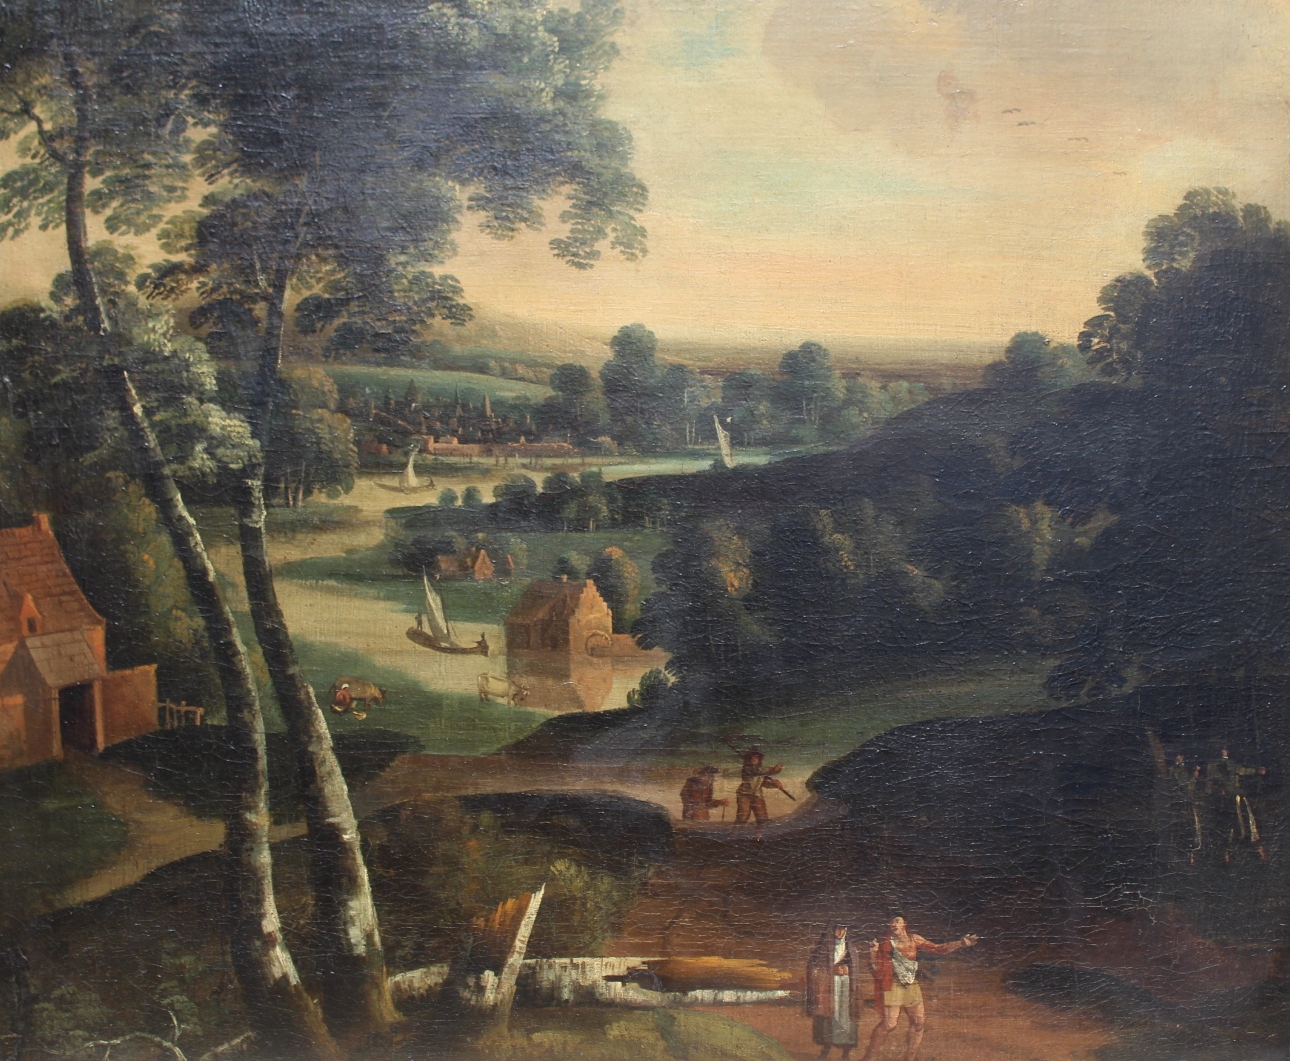 FOLLOWER OF GERARD VAN EDEMA (c.1652-c.1700) A RIVER LANDSCAPE WITH FIGURES, SPORTSMEN AND BOATS